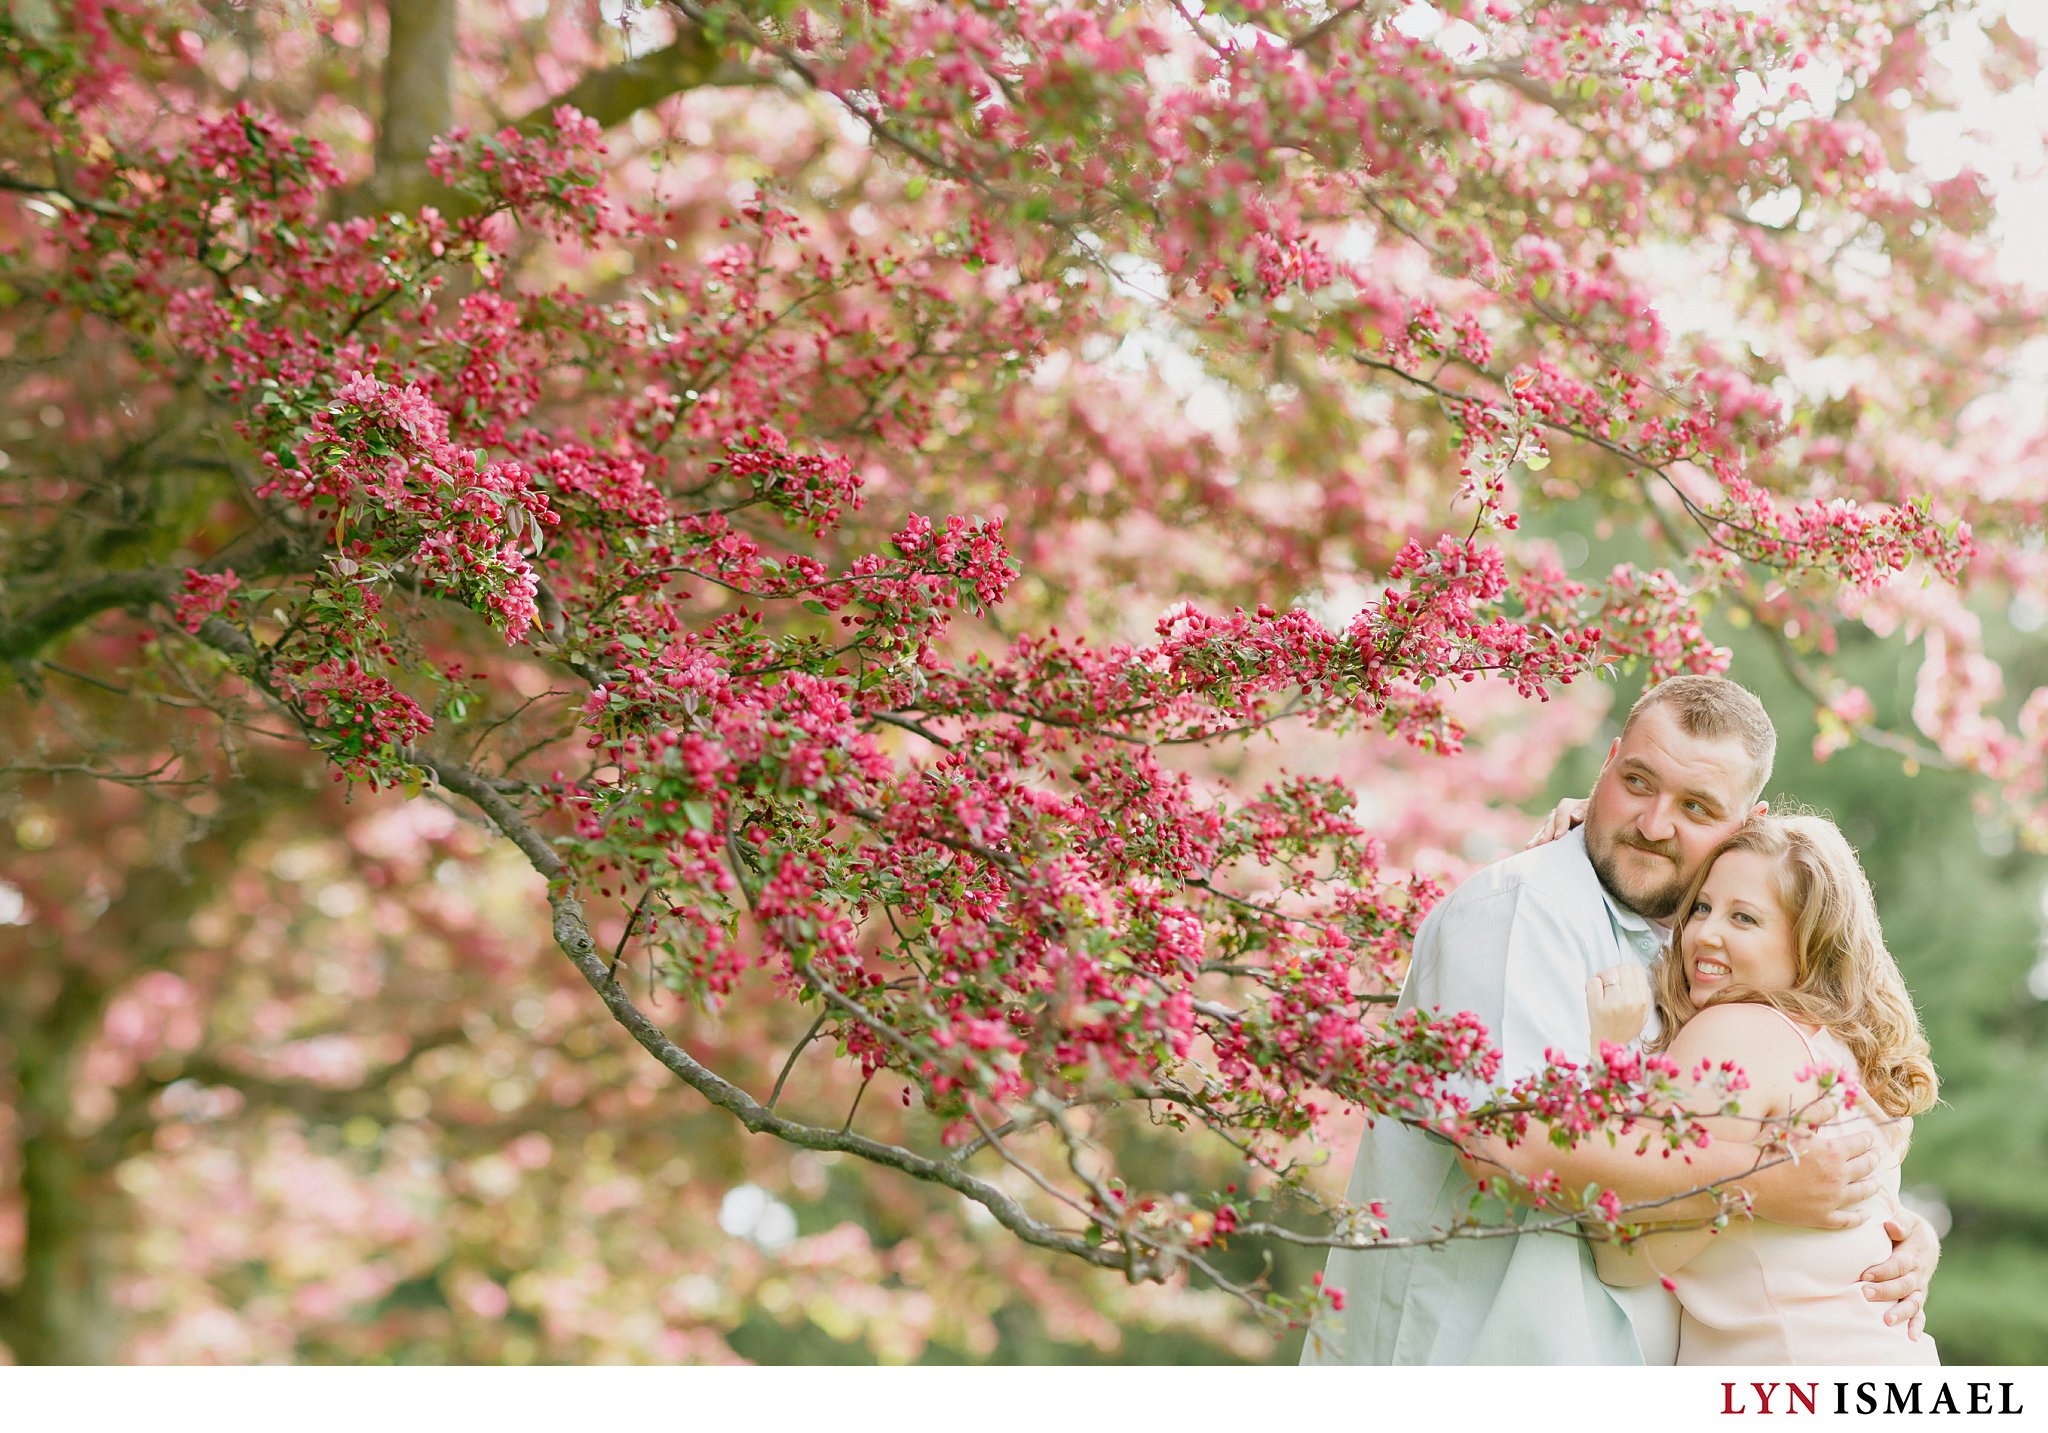 Waterloo wedding photographer shoots an engagement session in the spring time using the Brenizer method.